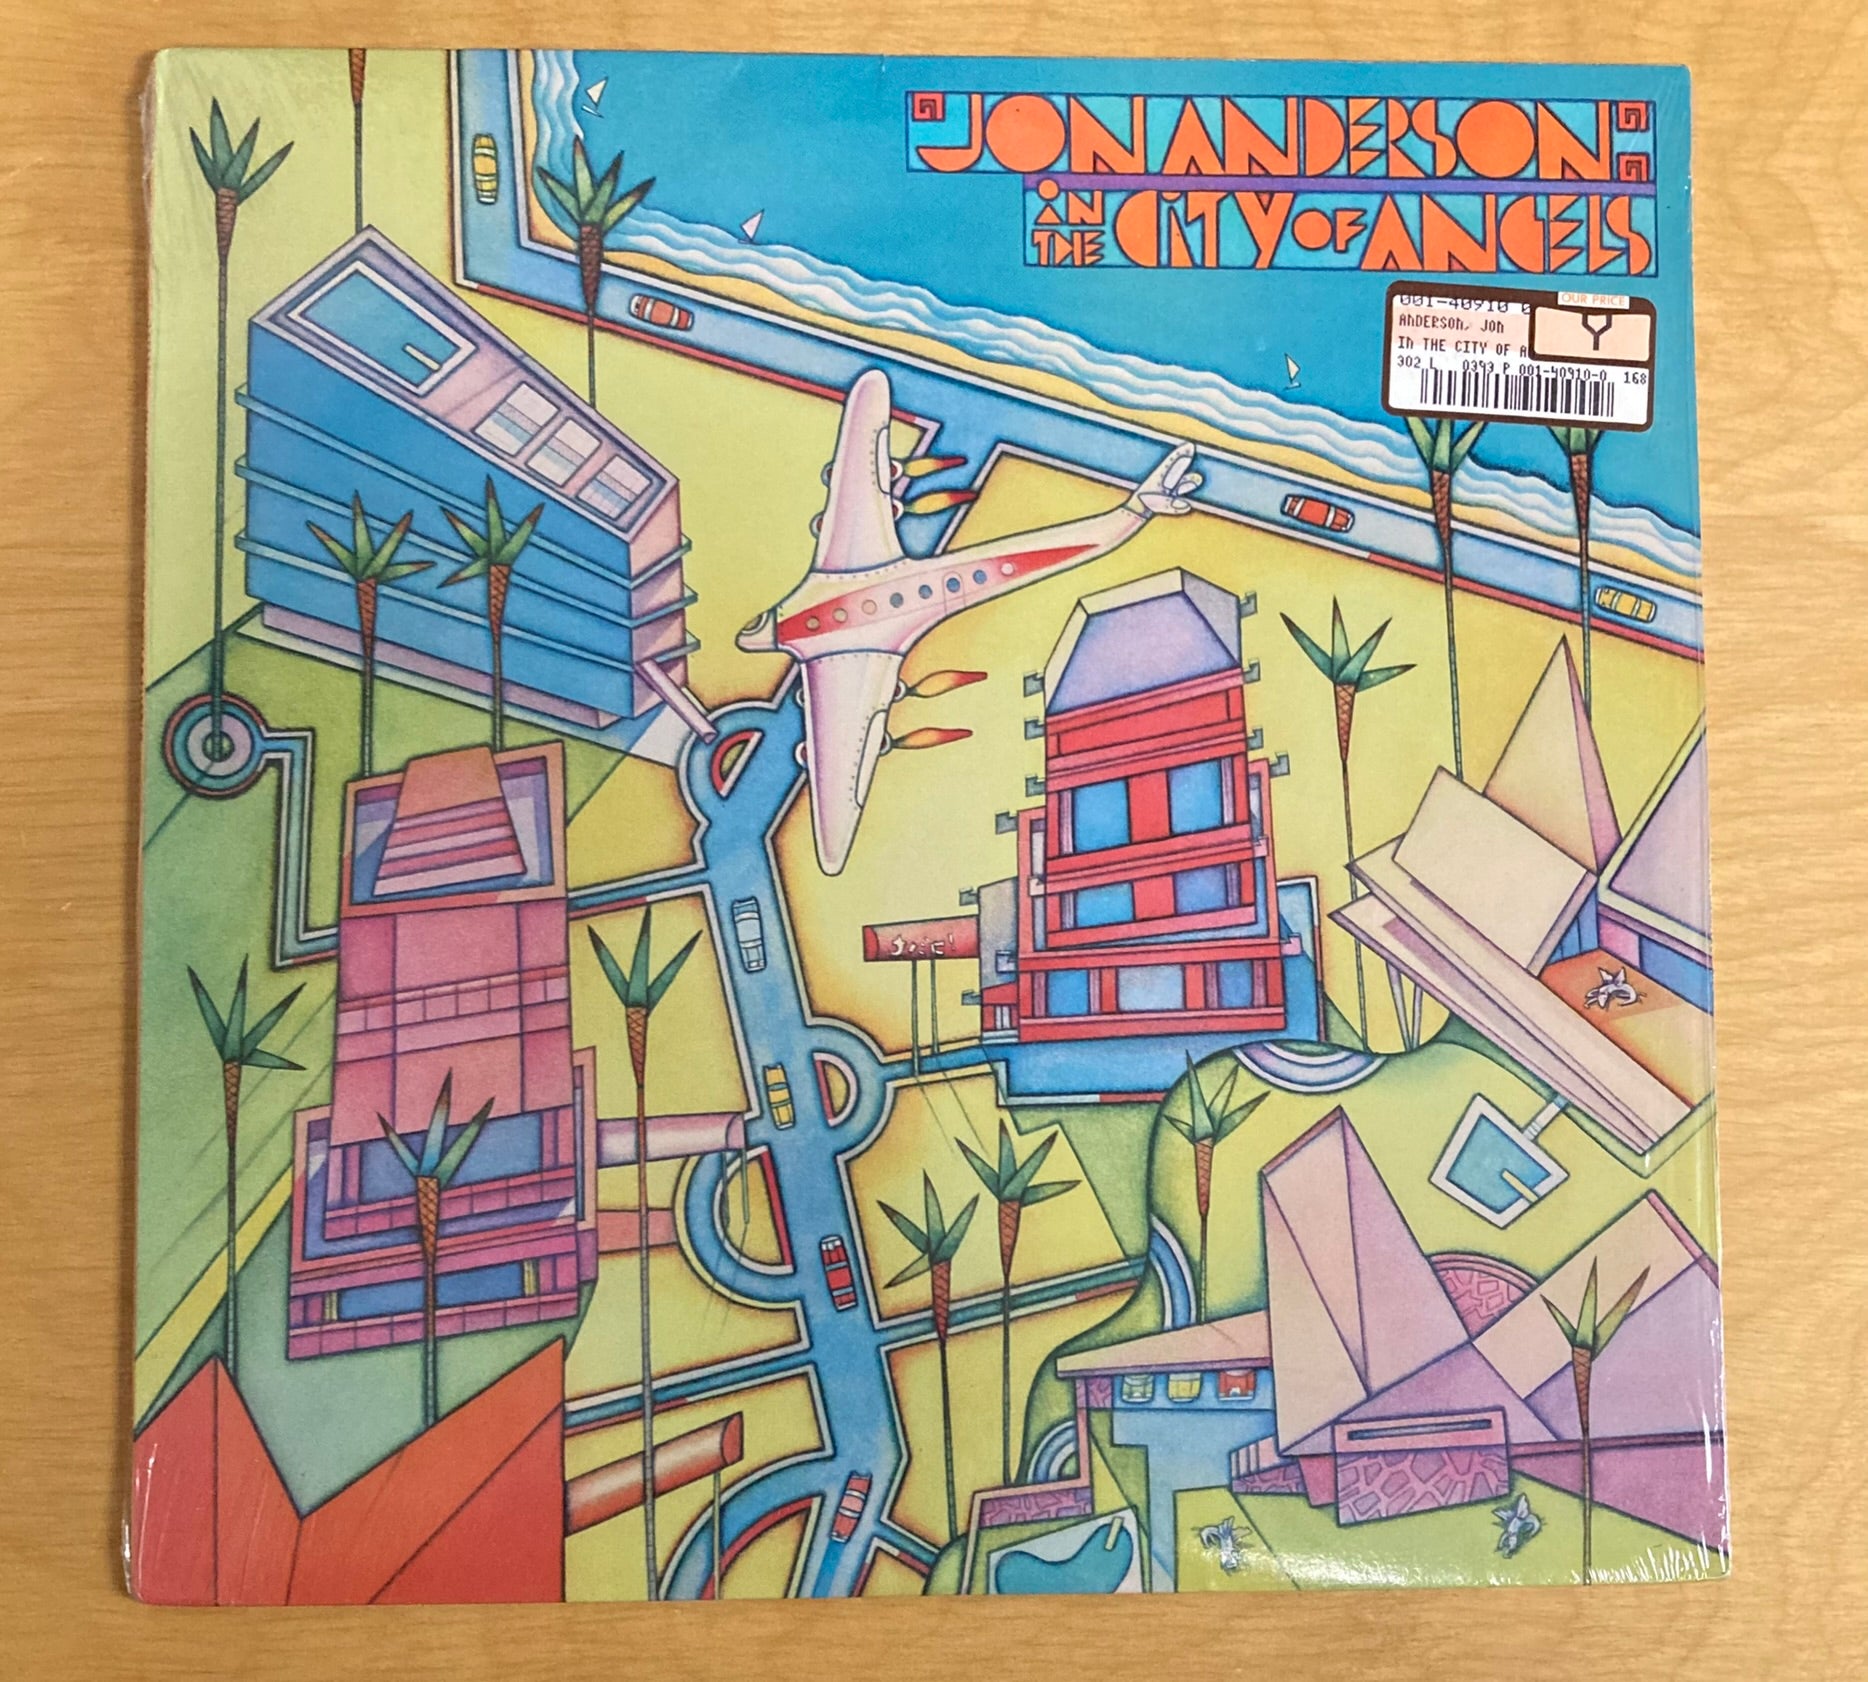 In the City Of Angels - Jon Anderson *Shrink Wrap* – Paul's Boutique Records